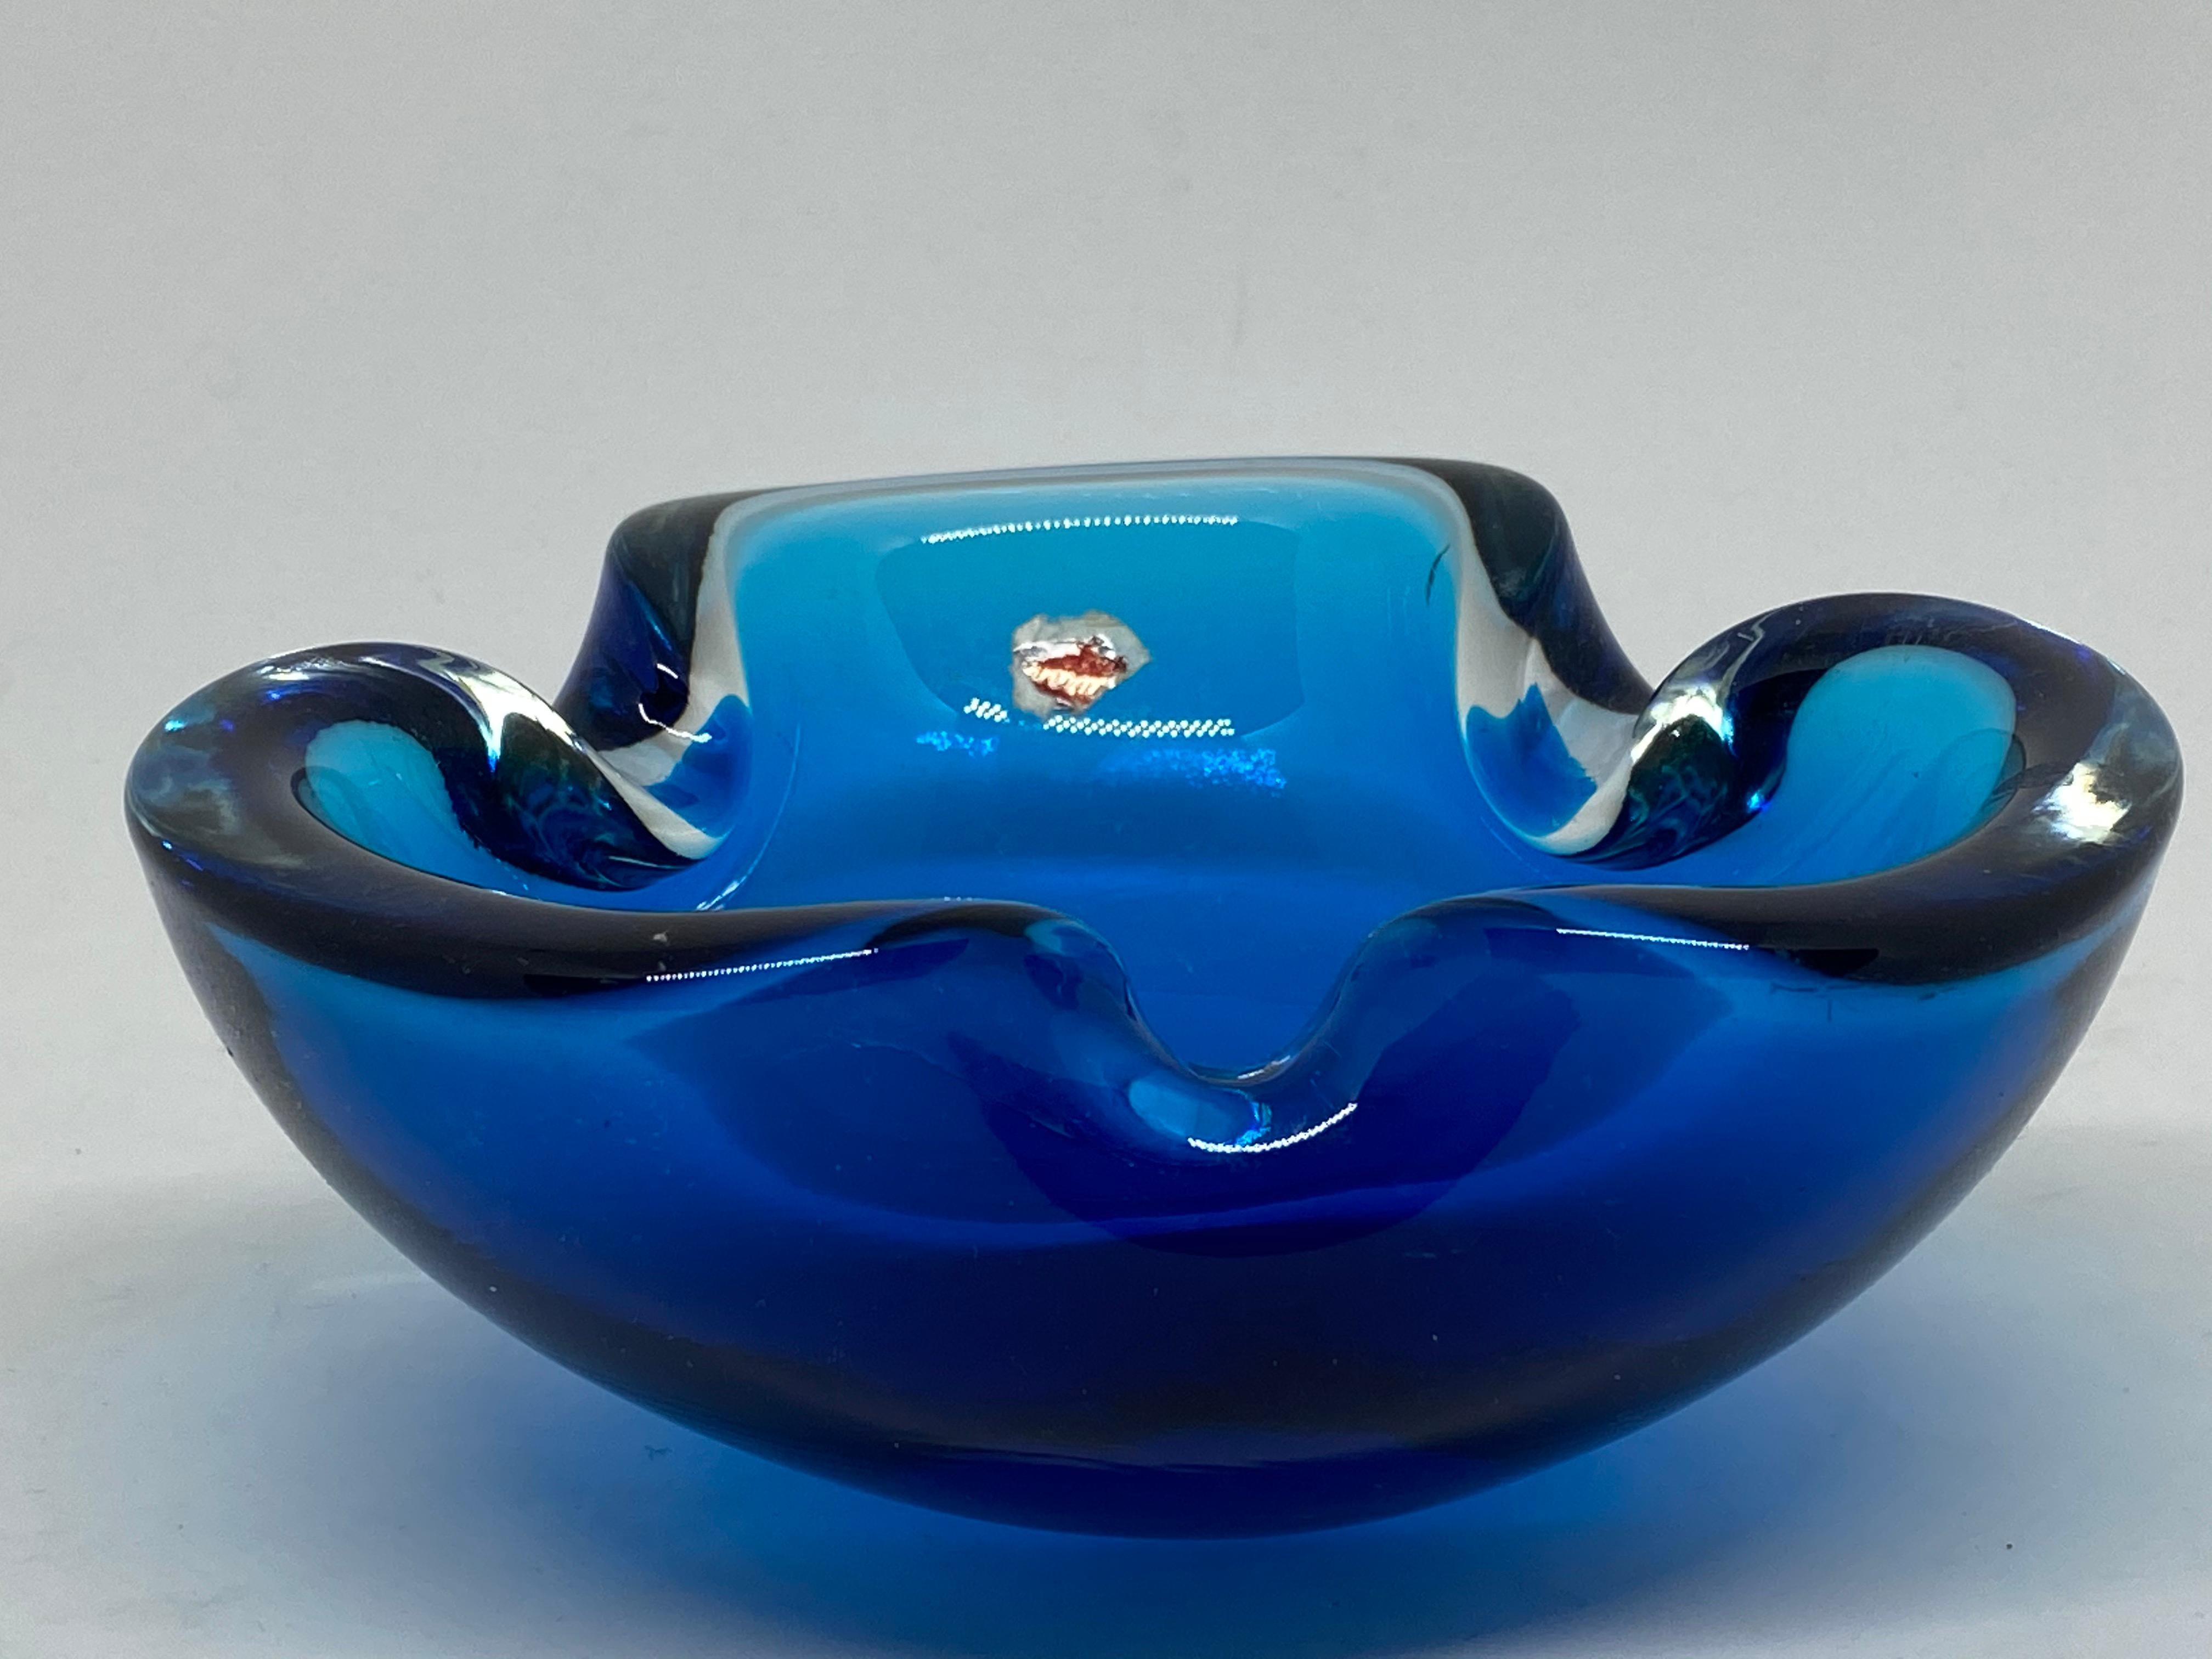 Gorgeous hand blown Murano art glass piece with Sommerso and bullicante techniques. A beautiful organic shaped bowl, catchall or ashtray in blue and clear, Italy, 1970s.